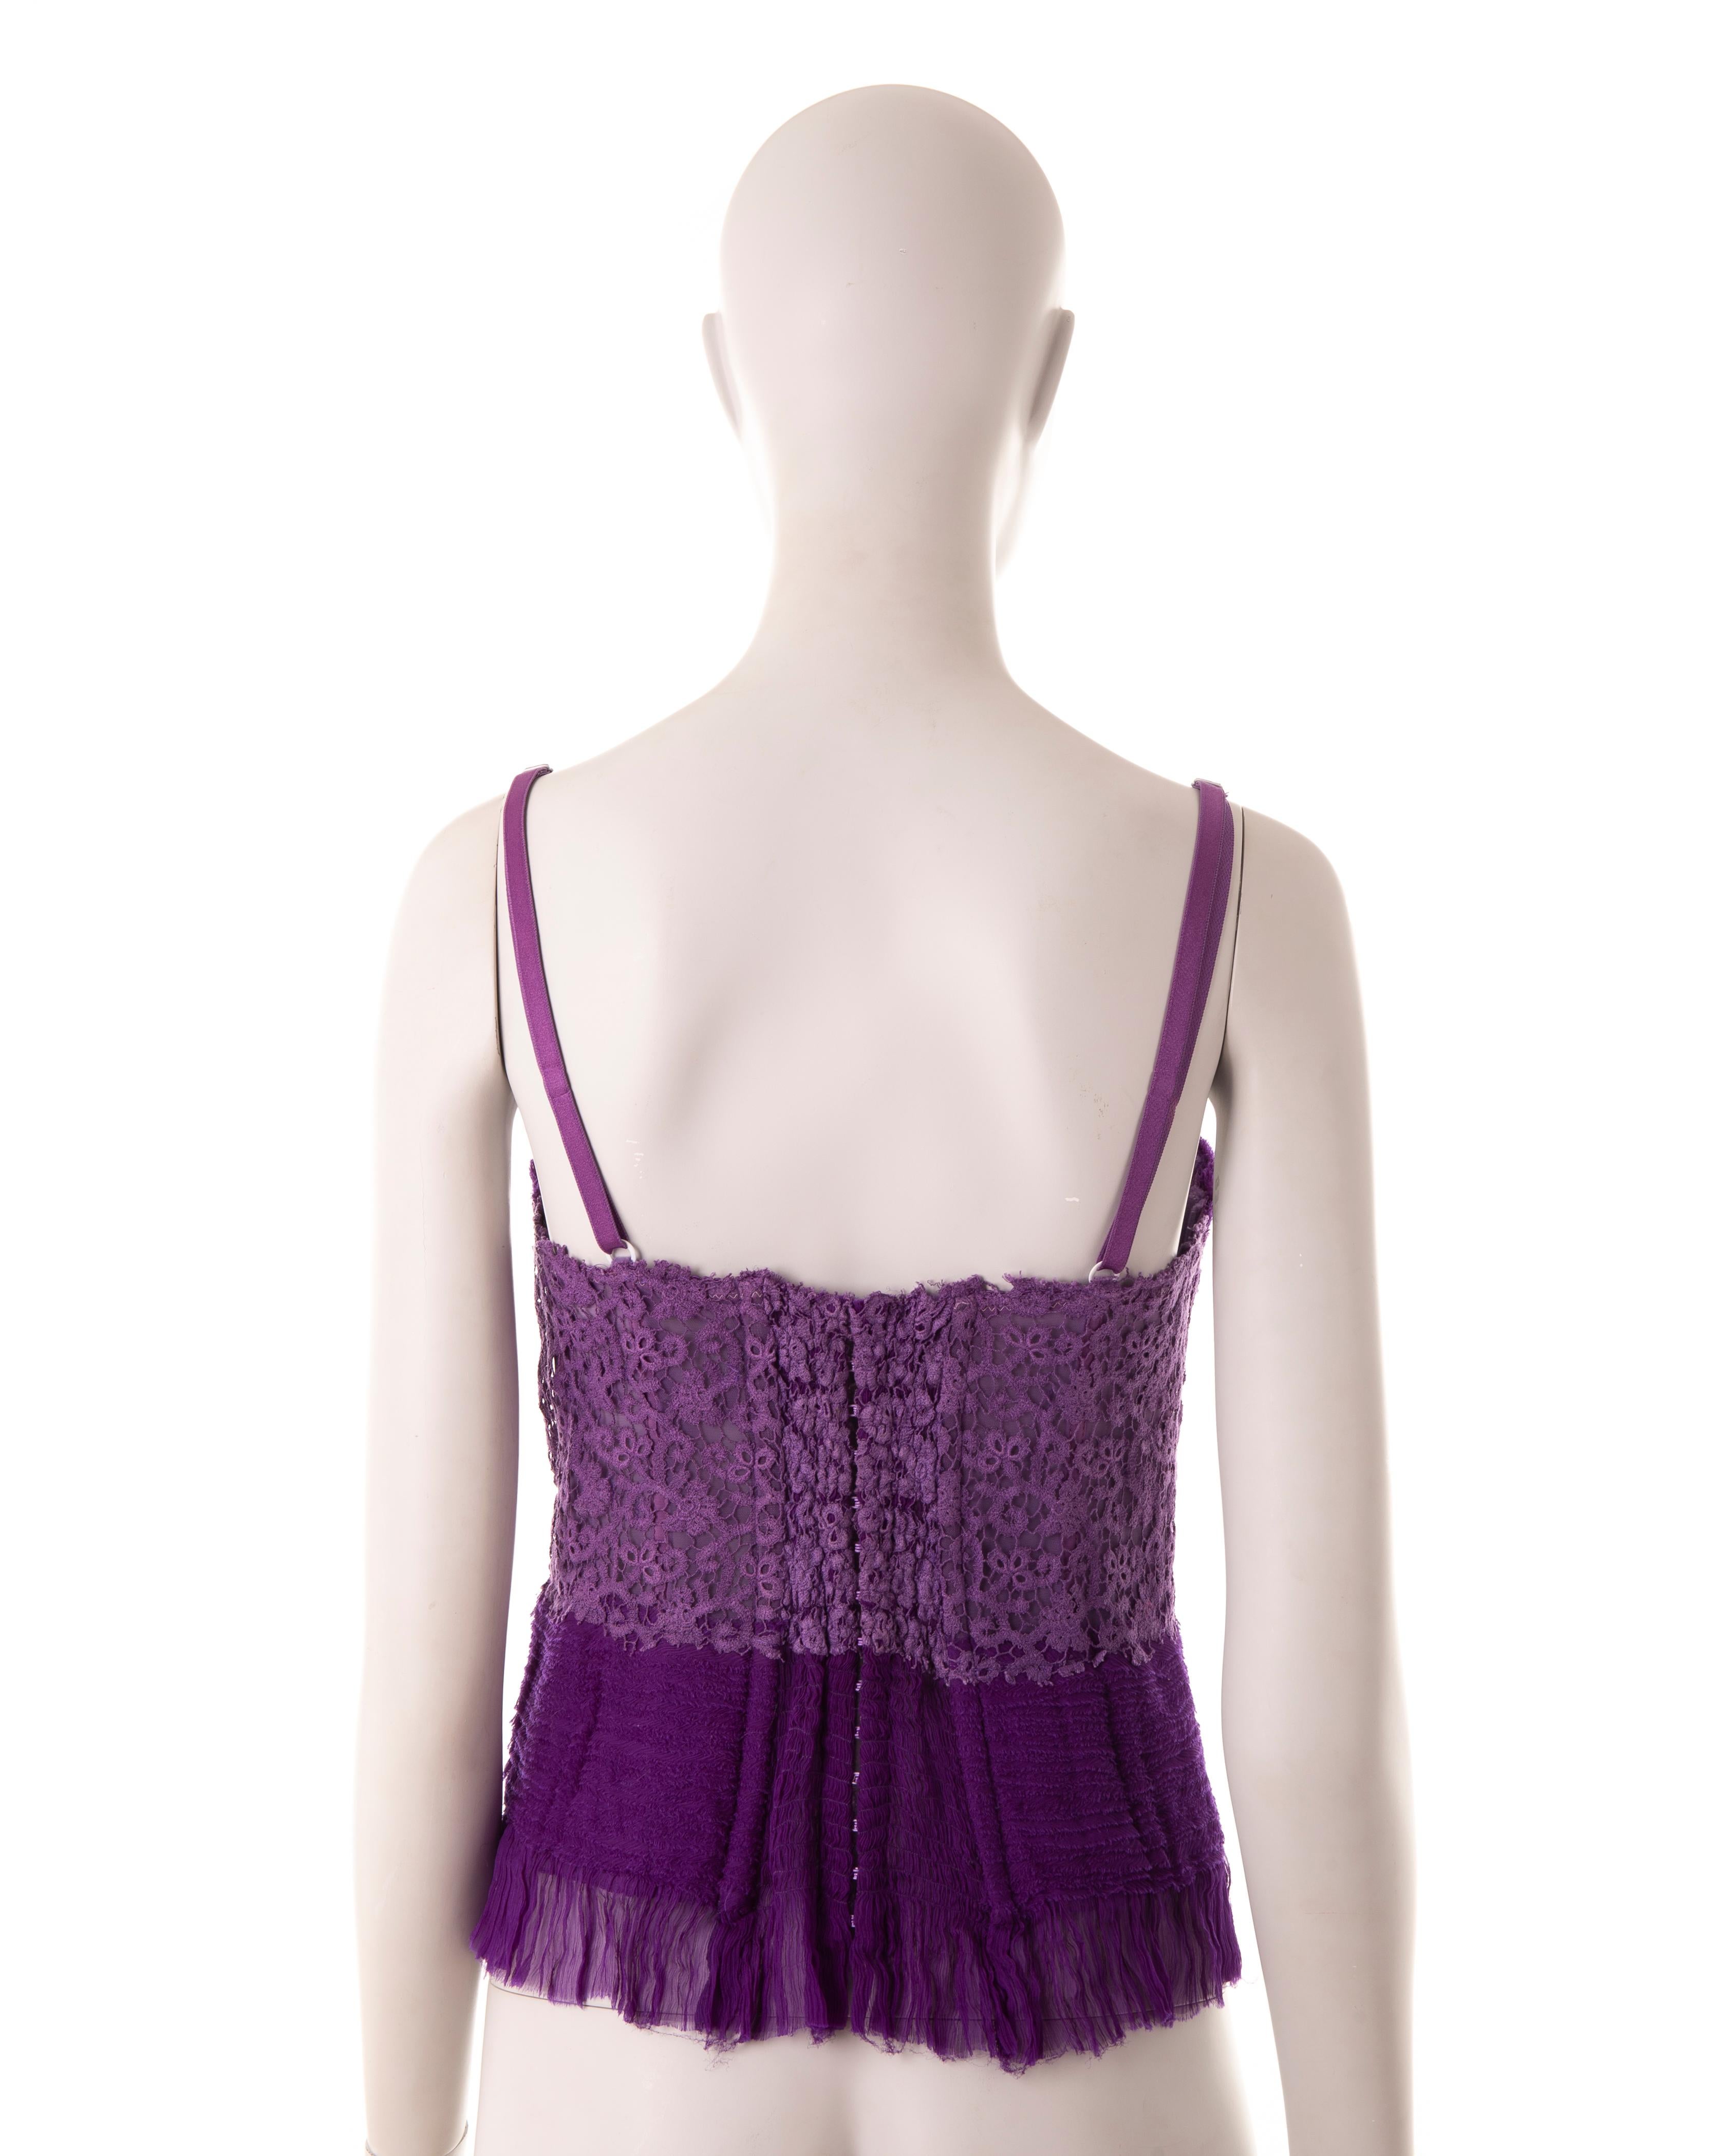 Ermanno Scervino S/S 2006 purple ruched chiffon and lace corset In Excellent Condition For Sale In Rome, IT